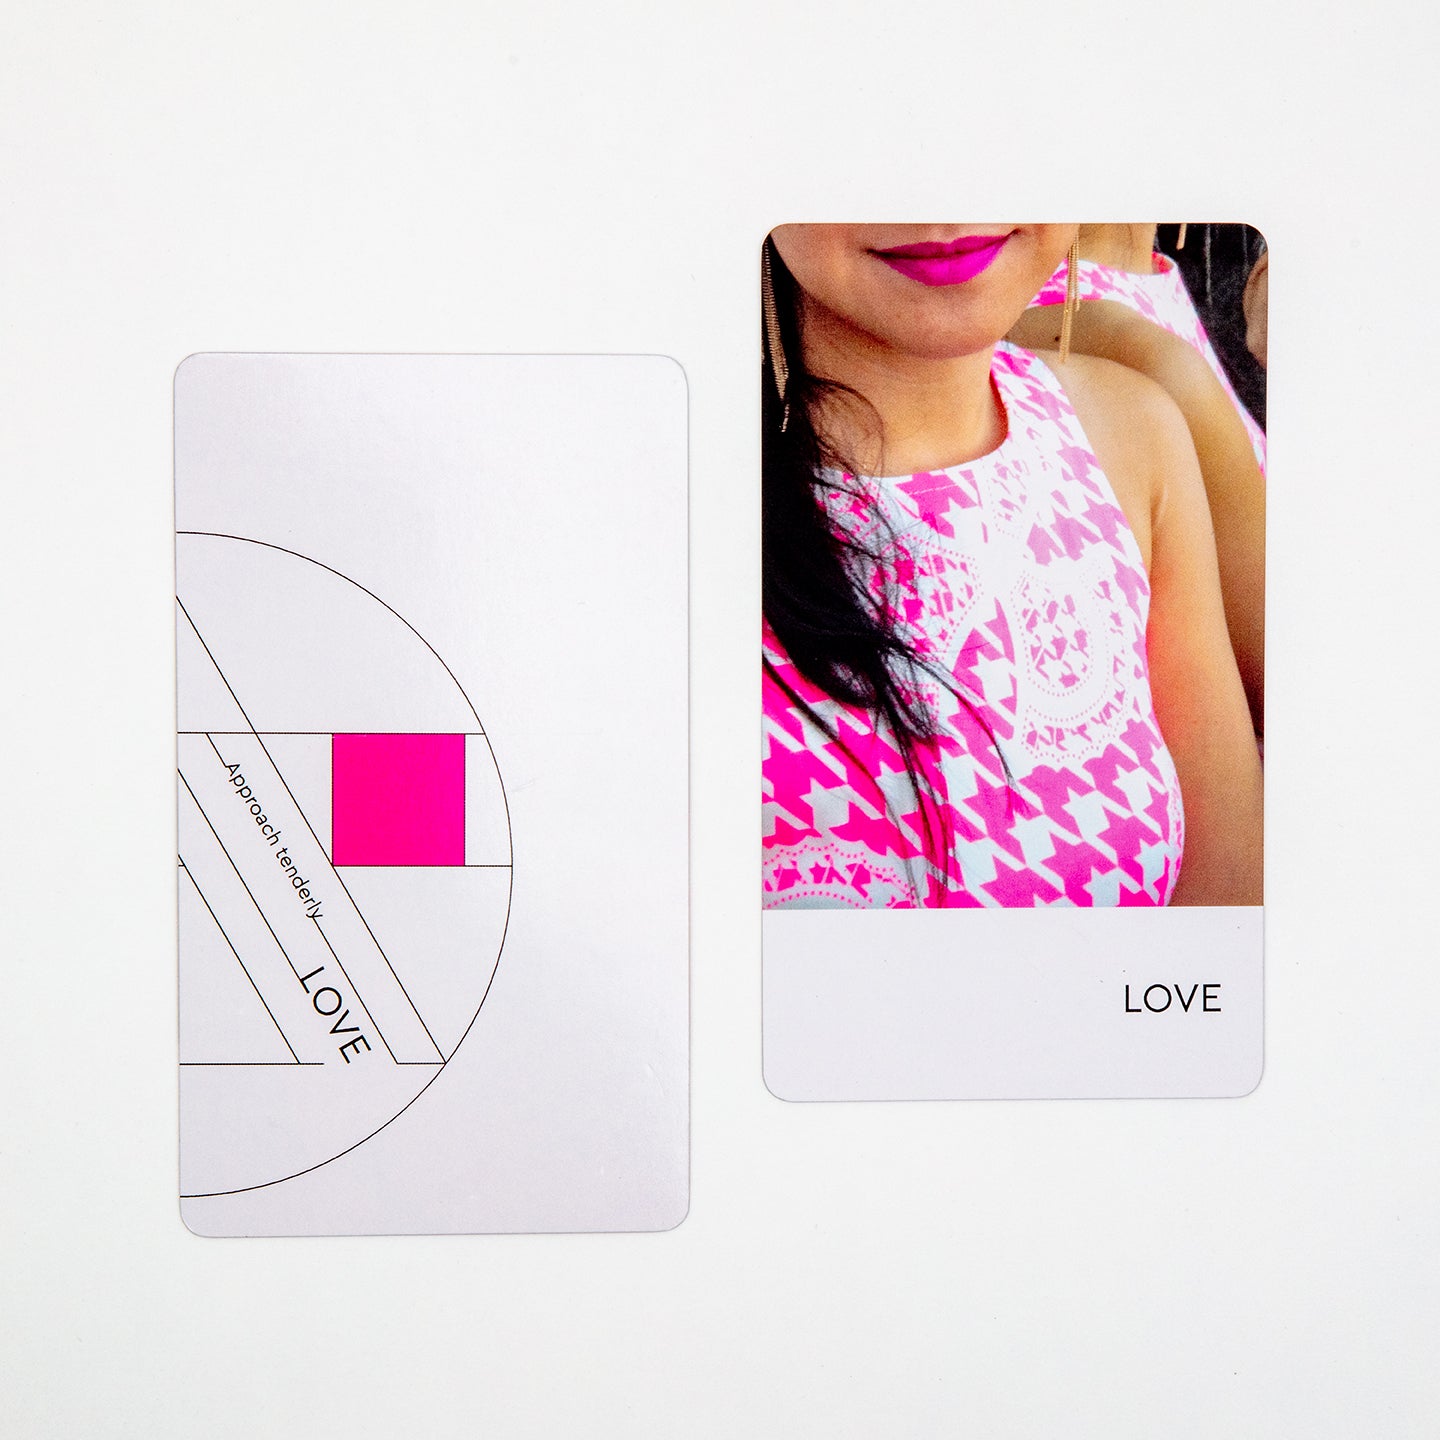 Feng shui card for LOVE with image of woman in pink.Wellness and oracle deck called 9 Worlds made by Everyday Art Cards